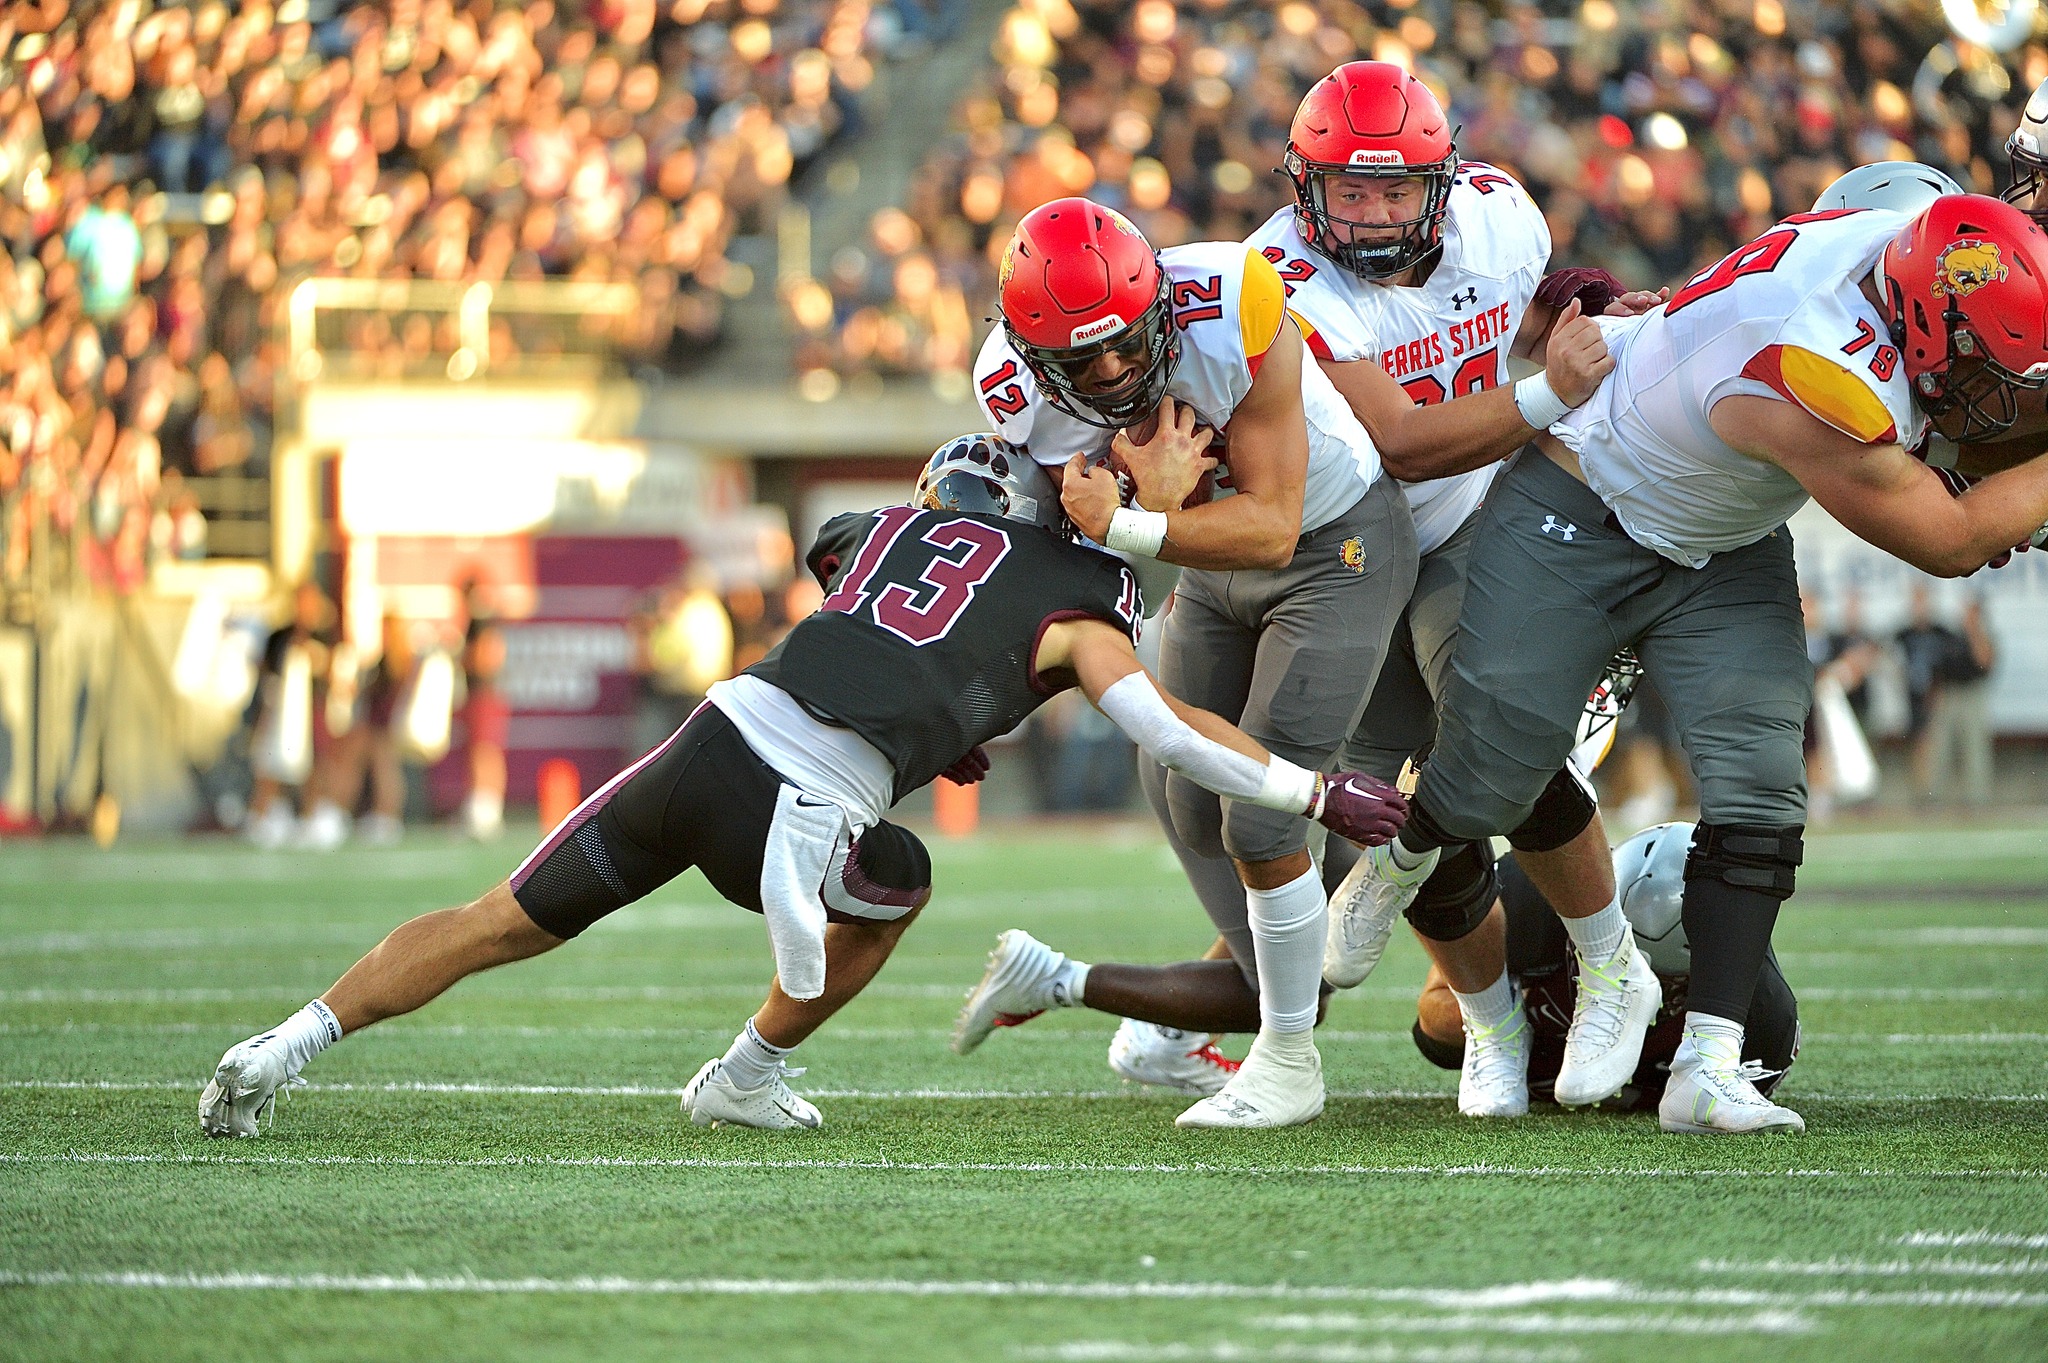 FCS Football: Ferris State at Montana May Not Be a Typical DII Tune-Up Game  - Underdog Dynasty